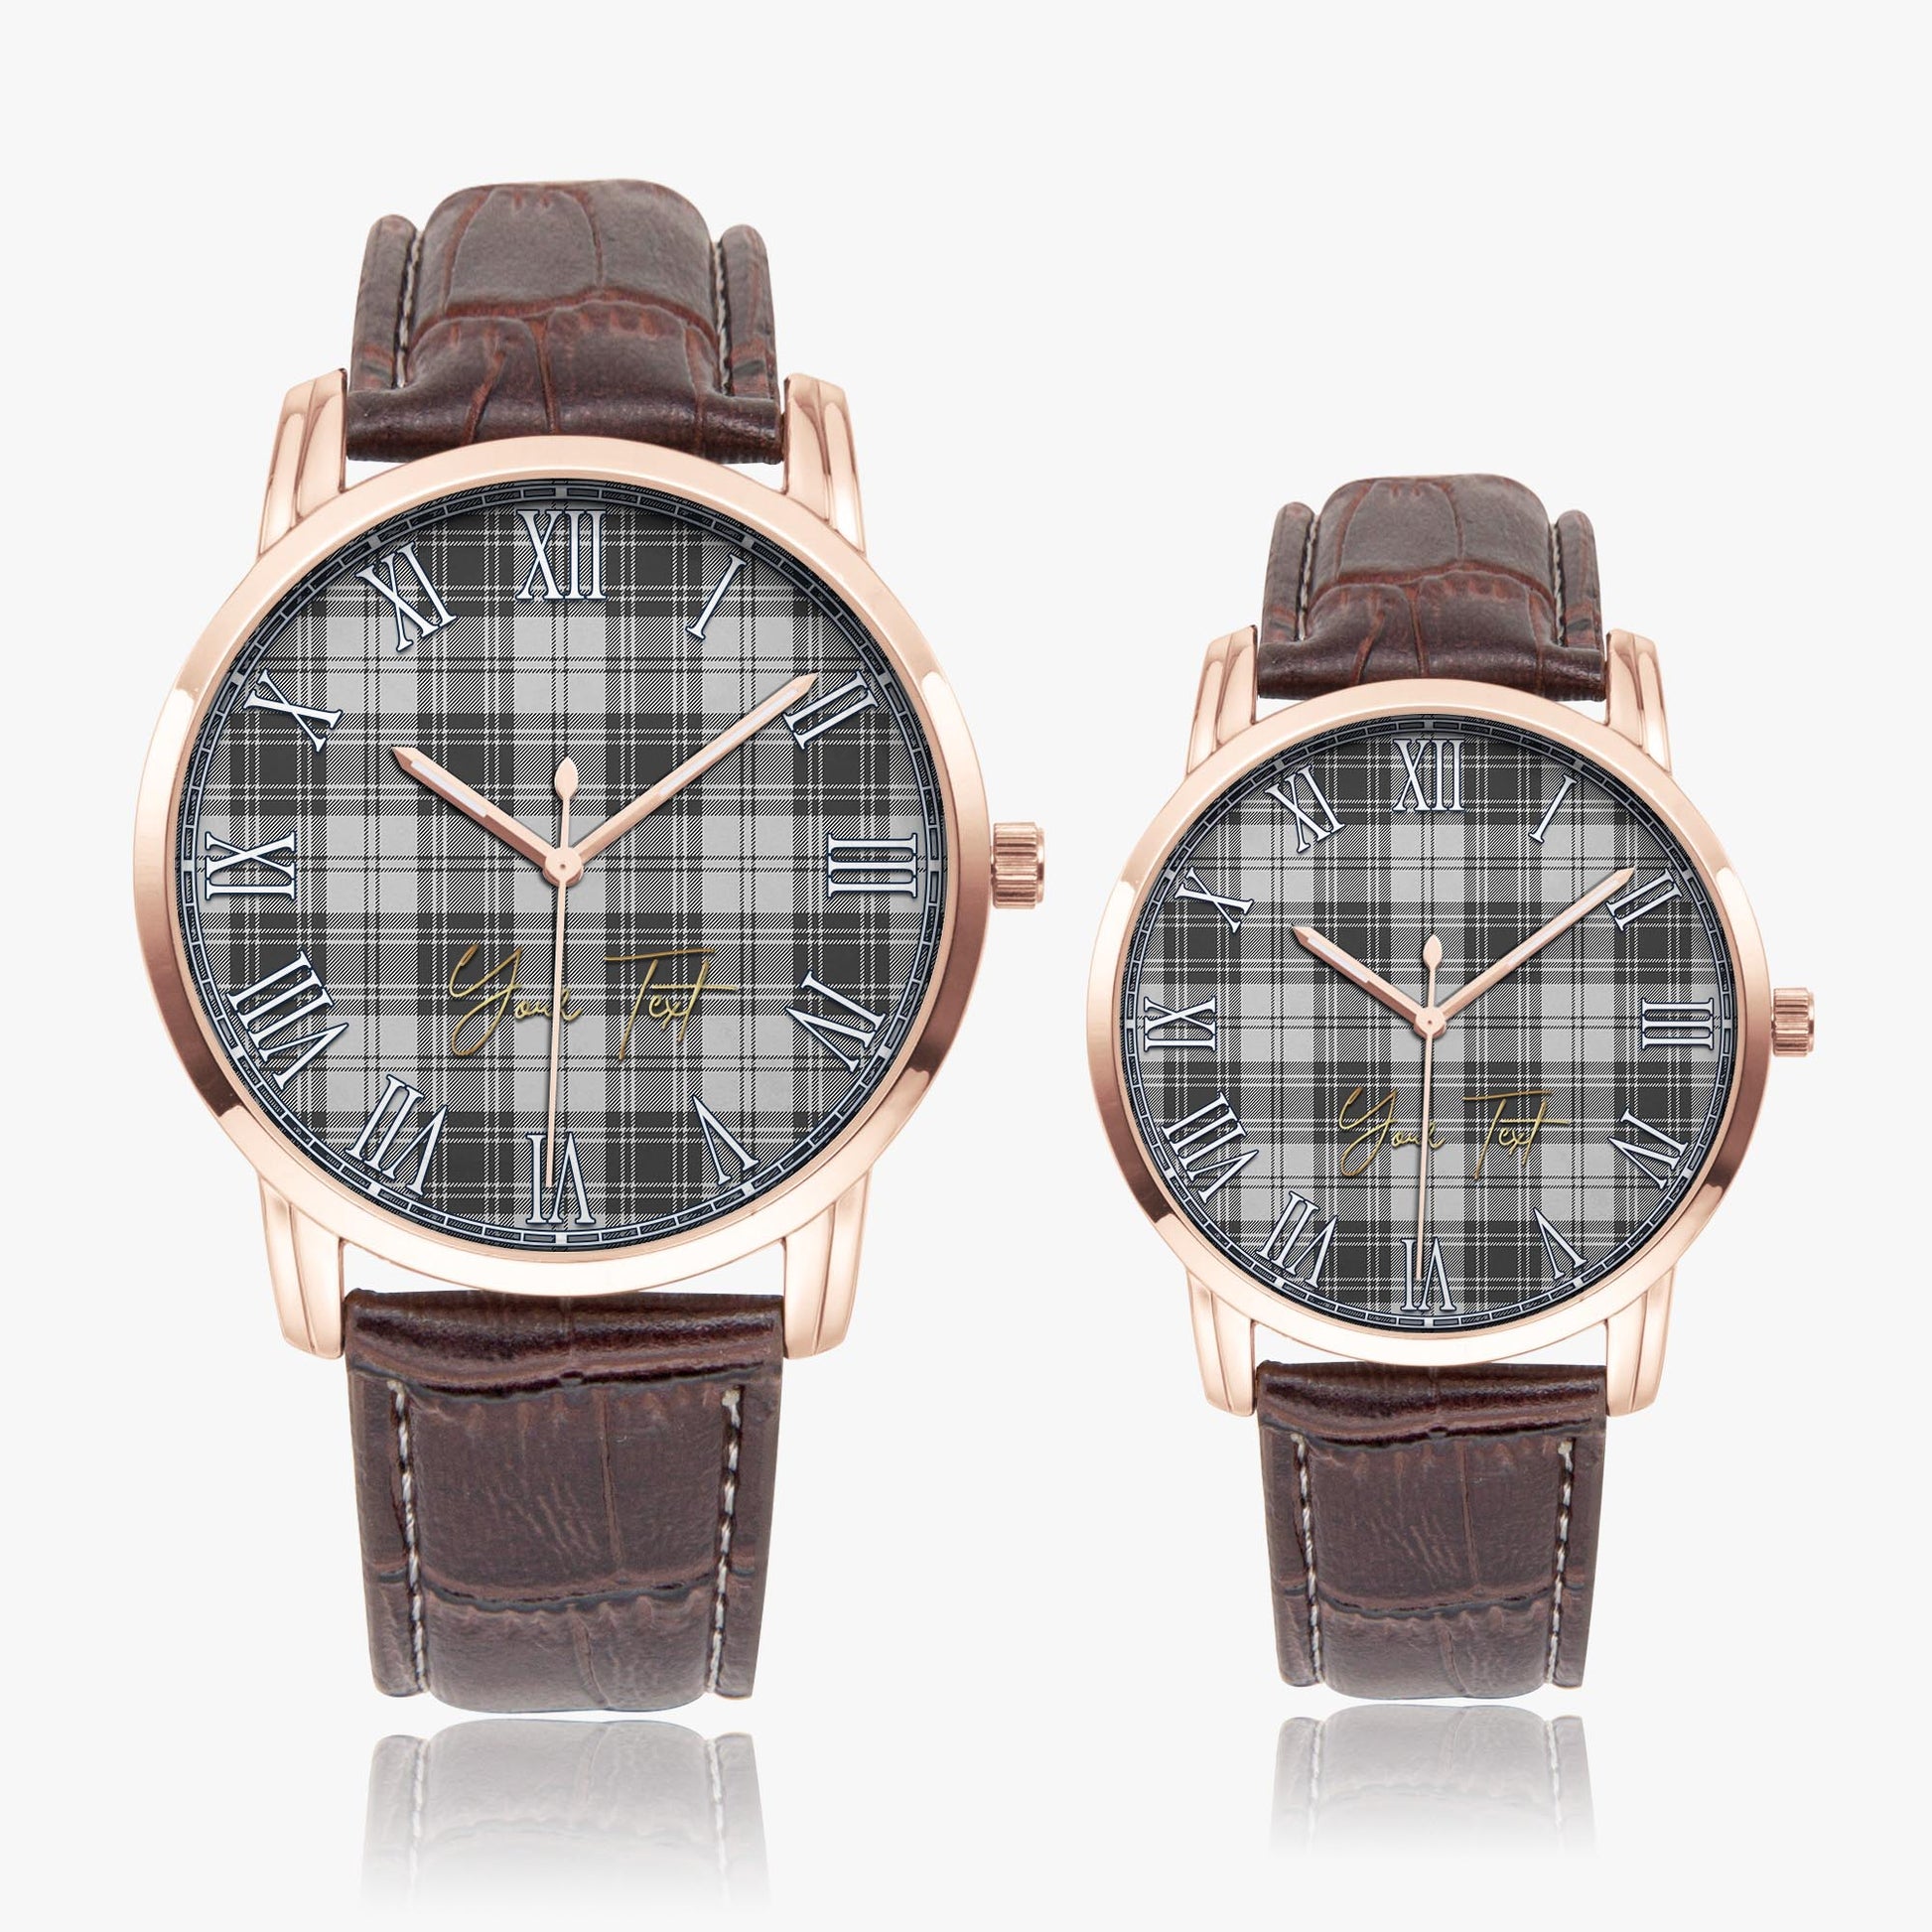 Glen Tartan Personalized Your Text Leather Trap Quartz Watch Wide Type Rose Gold Case With Brown Leather Strap - Tartanvibesclothing